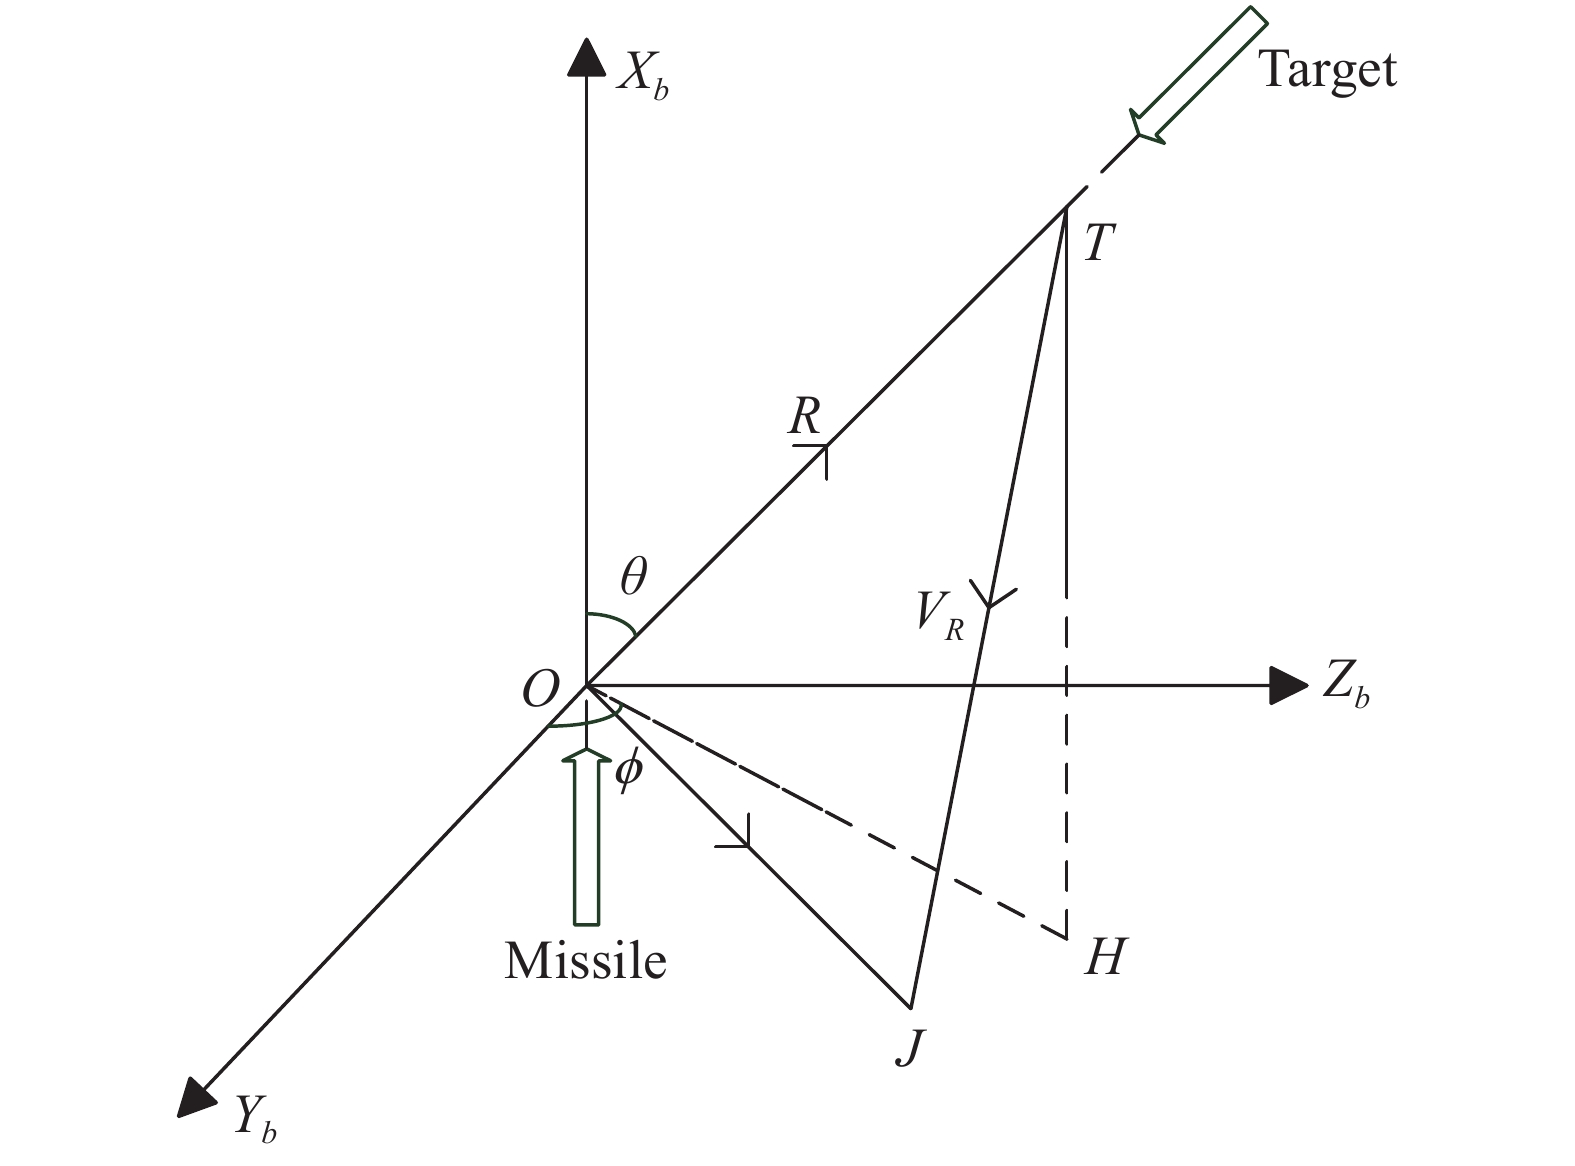 Typical missile-target rendezvous scene